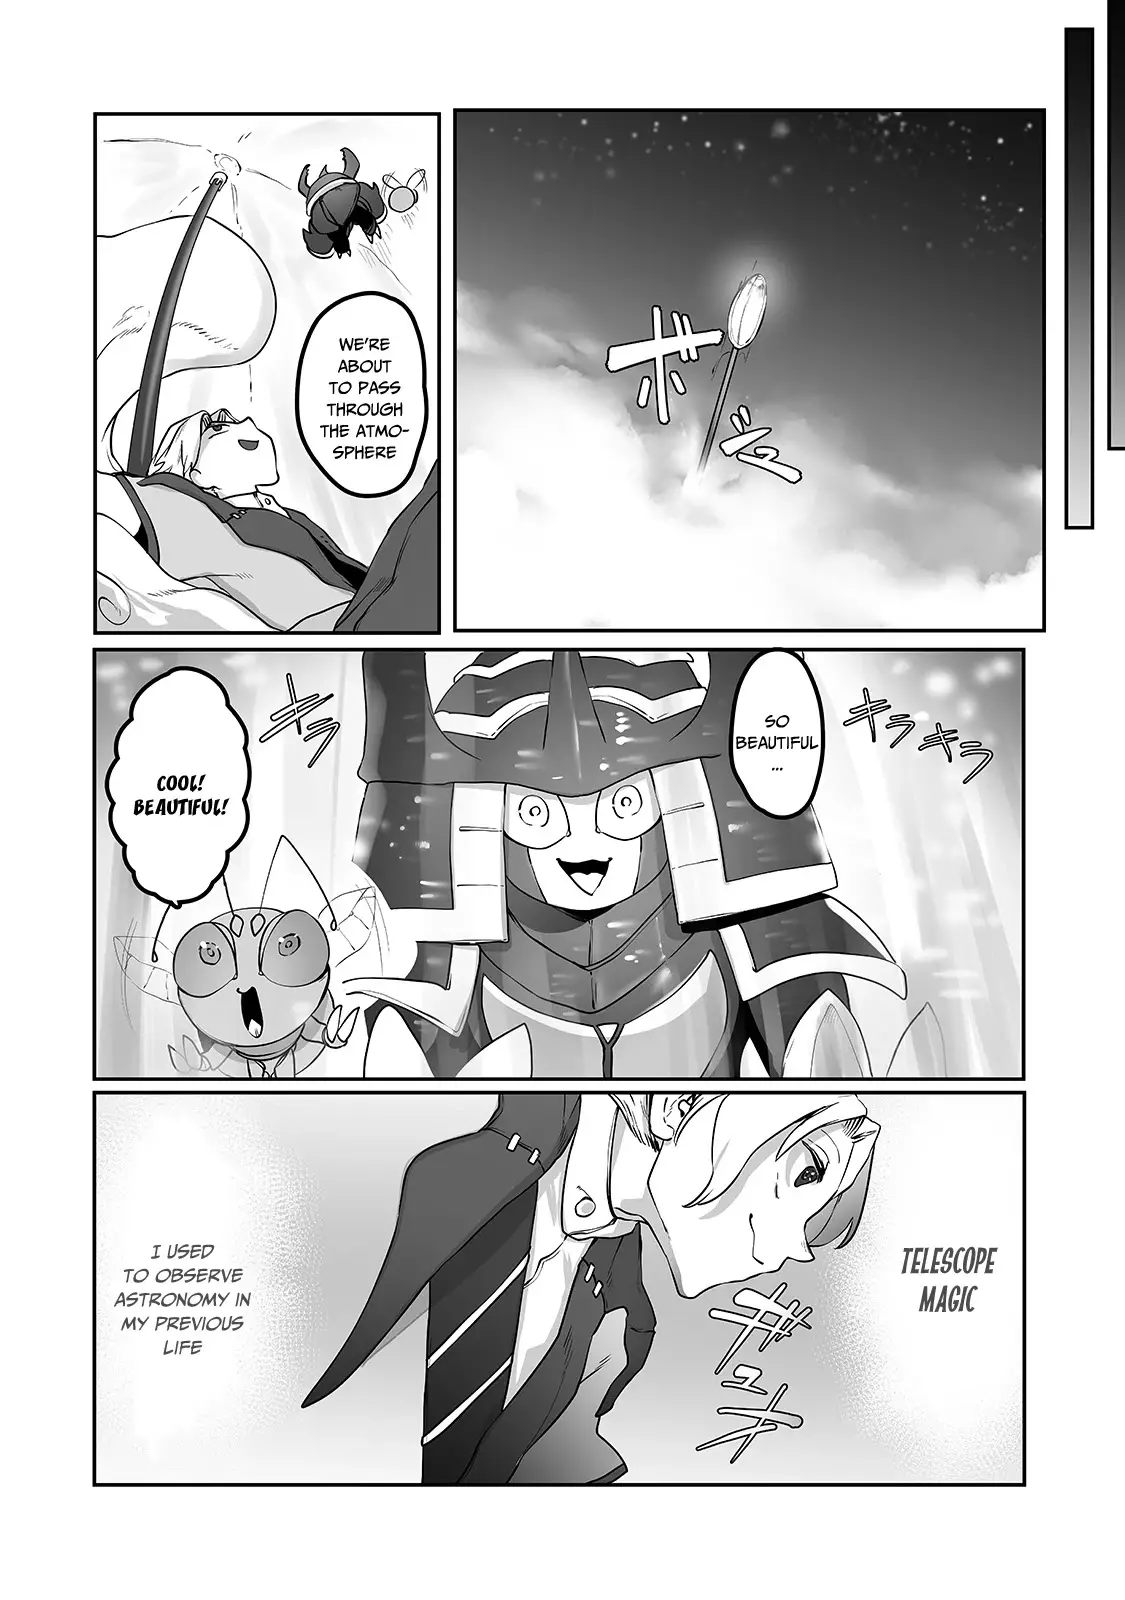 The Useless Tamer Will Turn Into The Top Unconsciously By My Previous Life Knowledge - 10 page 23